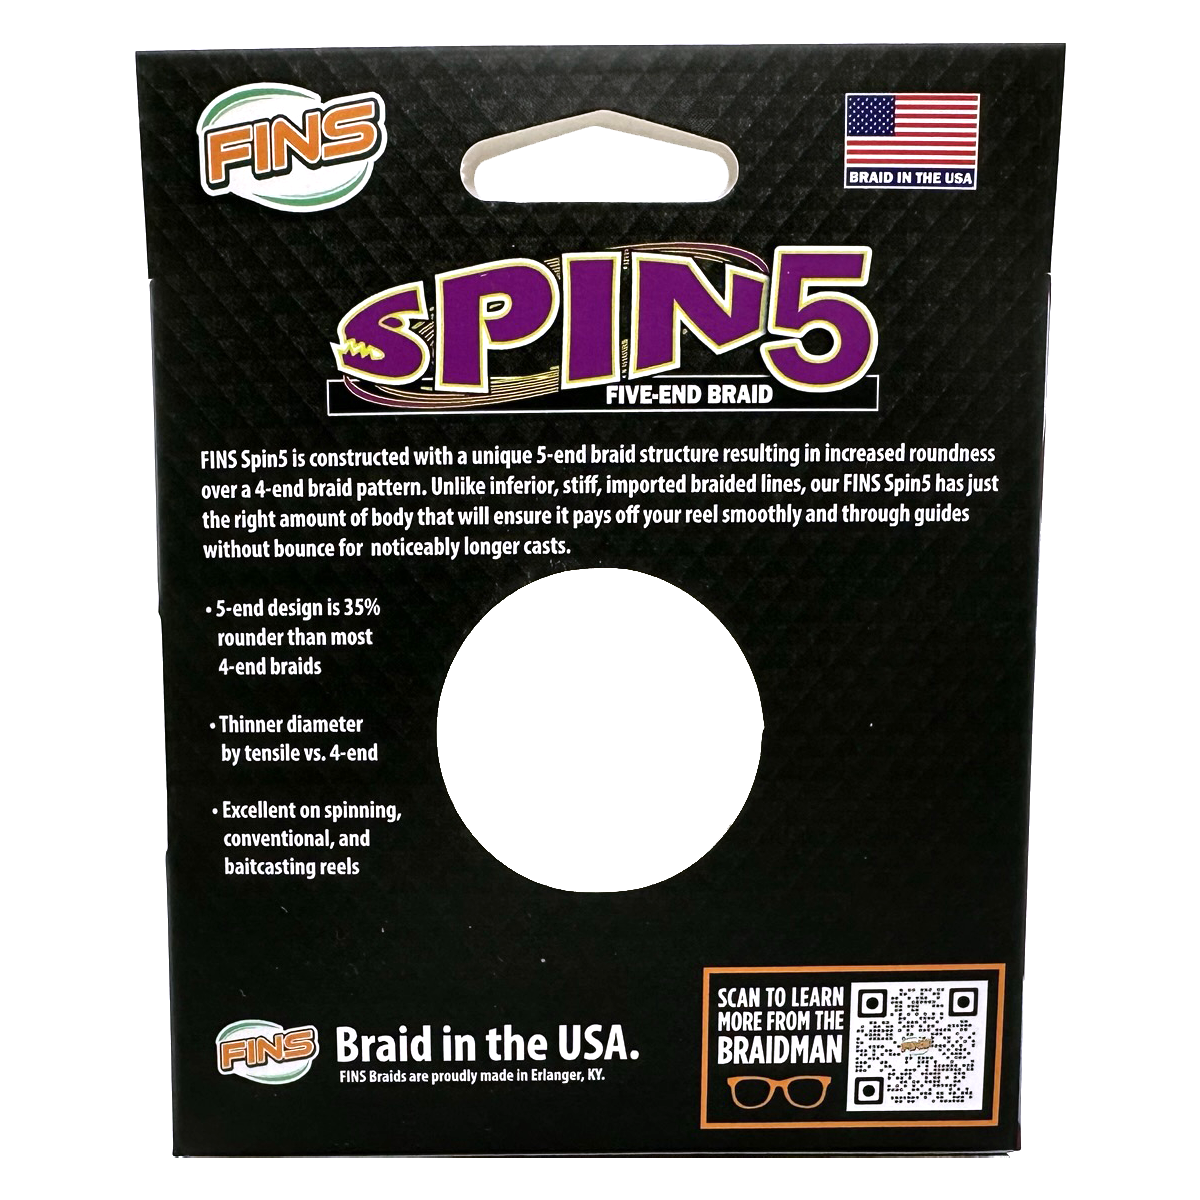 FINS Spin5 is constructed with a unique 5-end braid structure resulting in increased roundness over a 4-end braid pattern. Unlike inferior, stiff, imported braided lines, our FINS Spin5 has just the right amount of body that will ensure it pays off your reel smoothly and through guides without bounce for noticeably longer casts. 